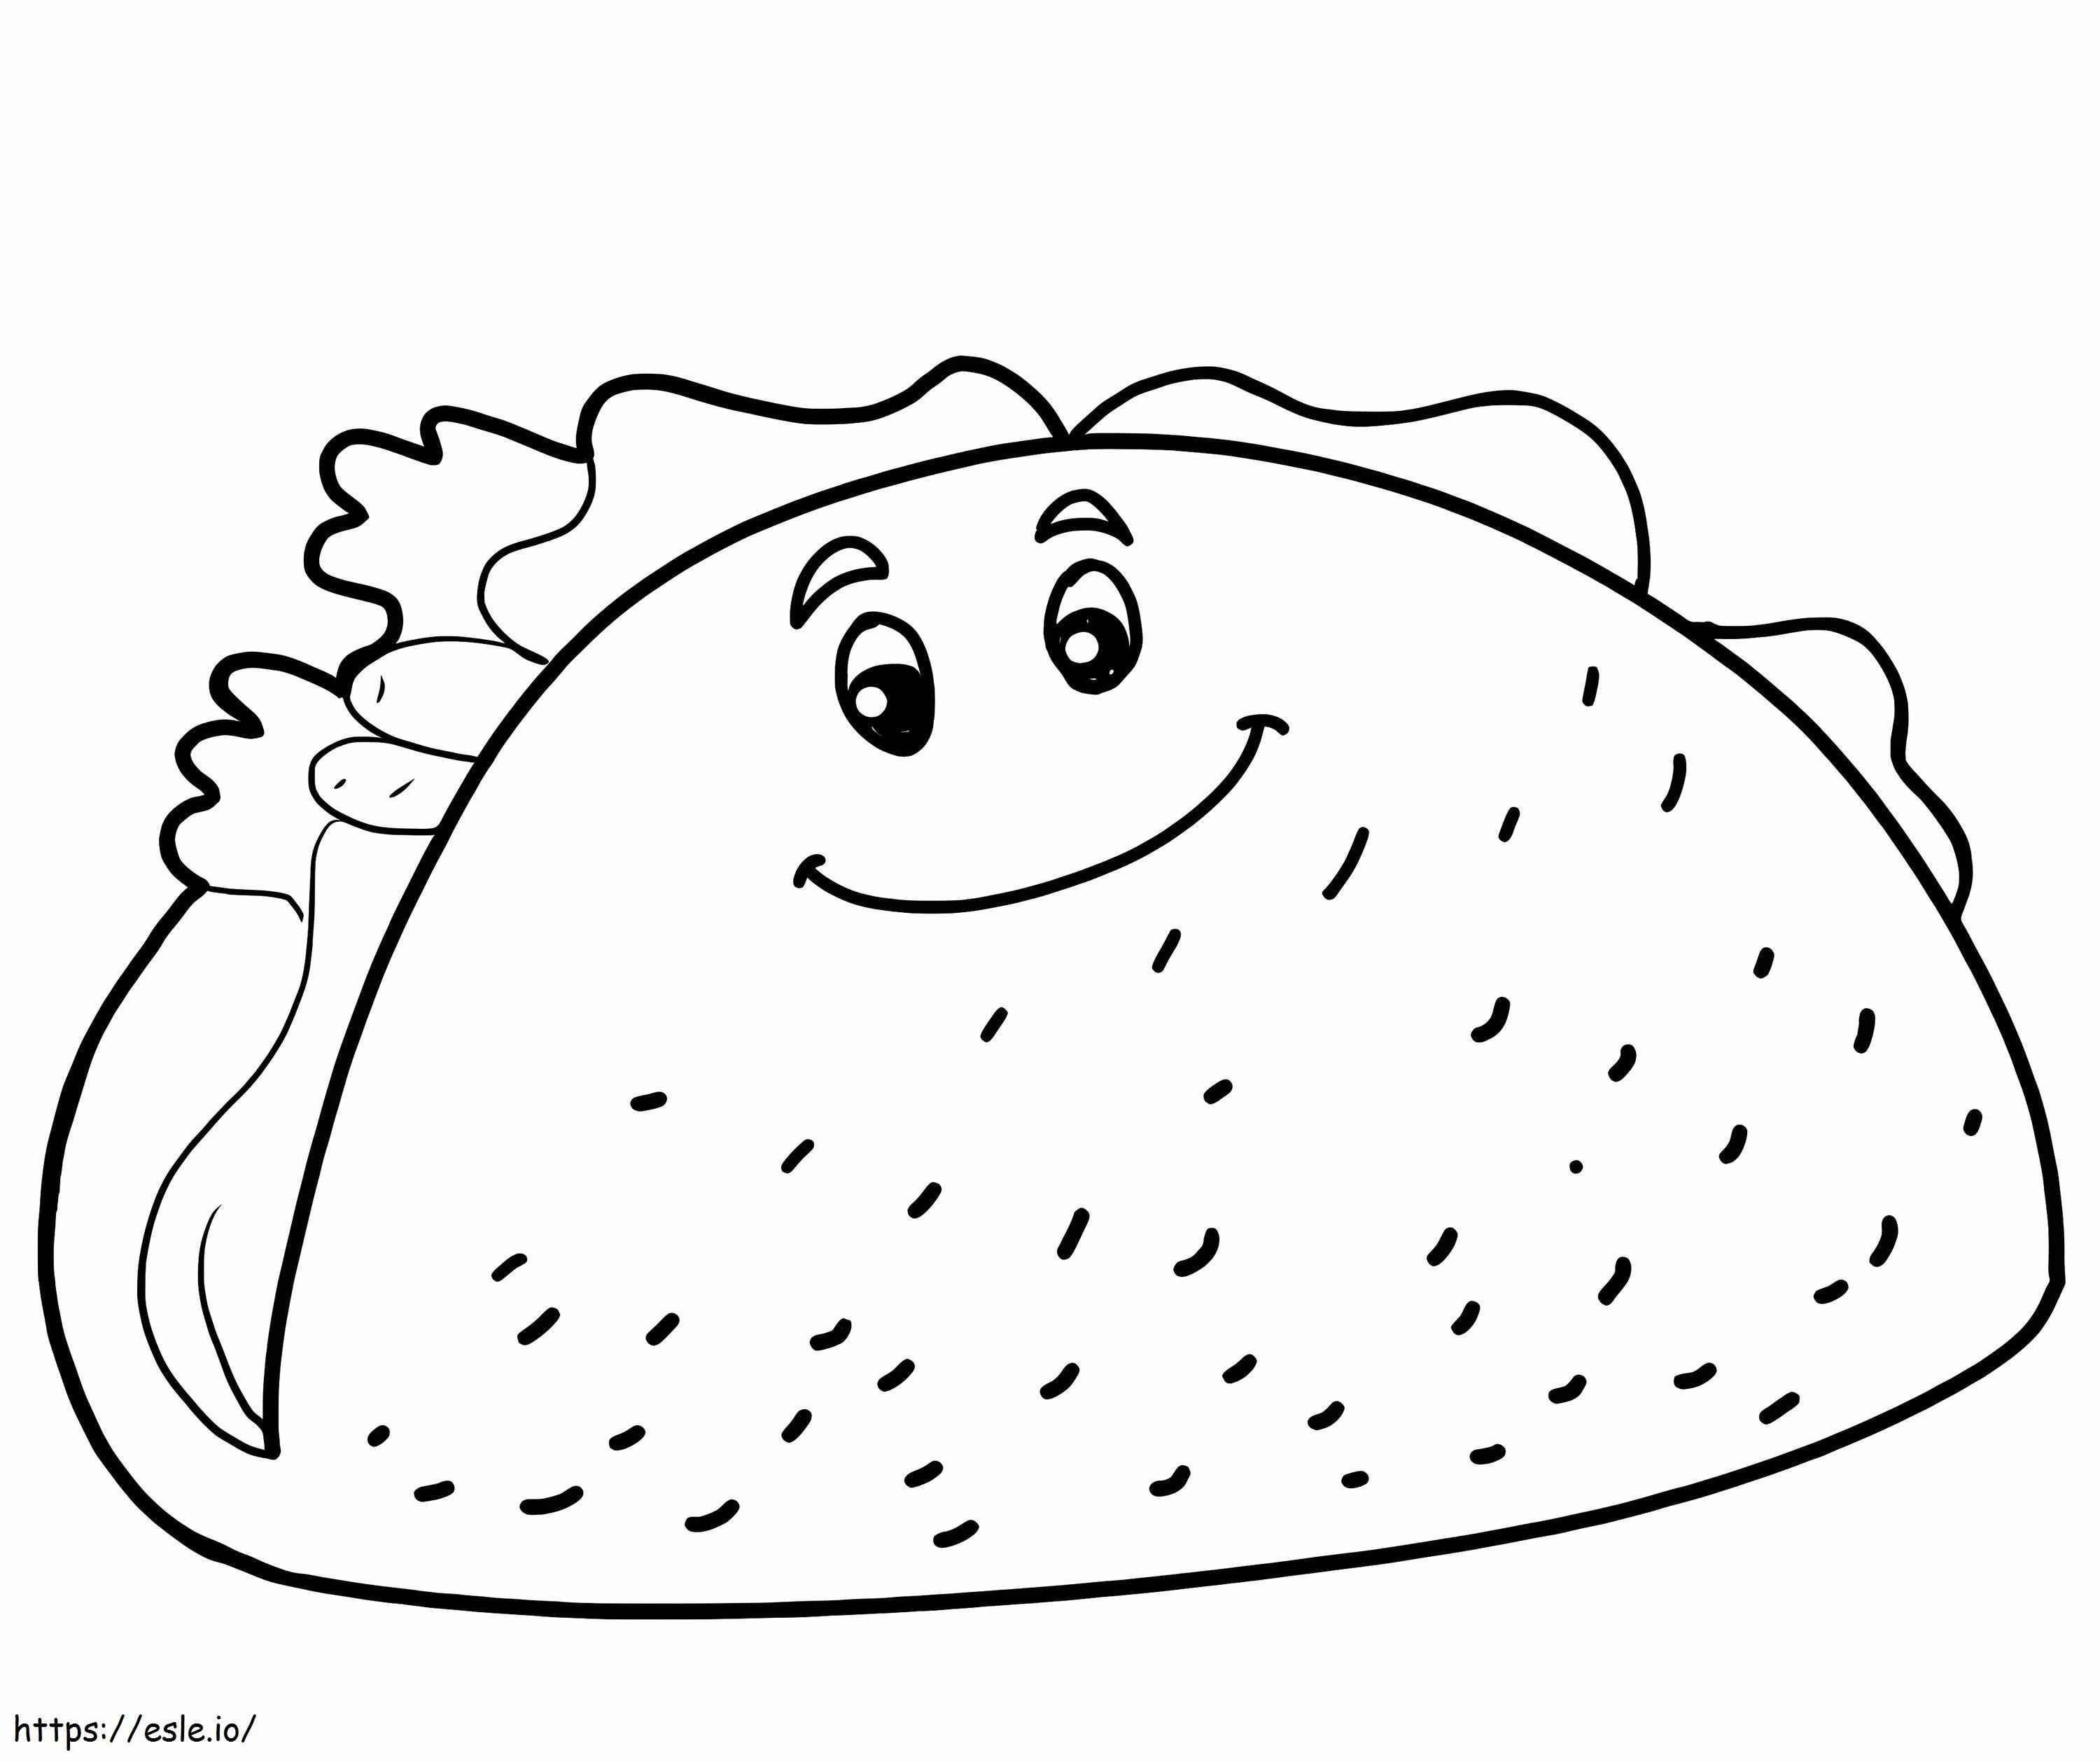 Smiling Taco coloring page